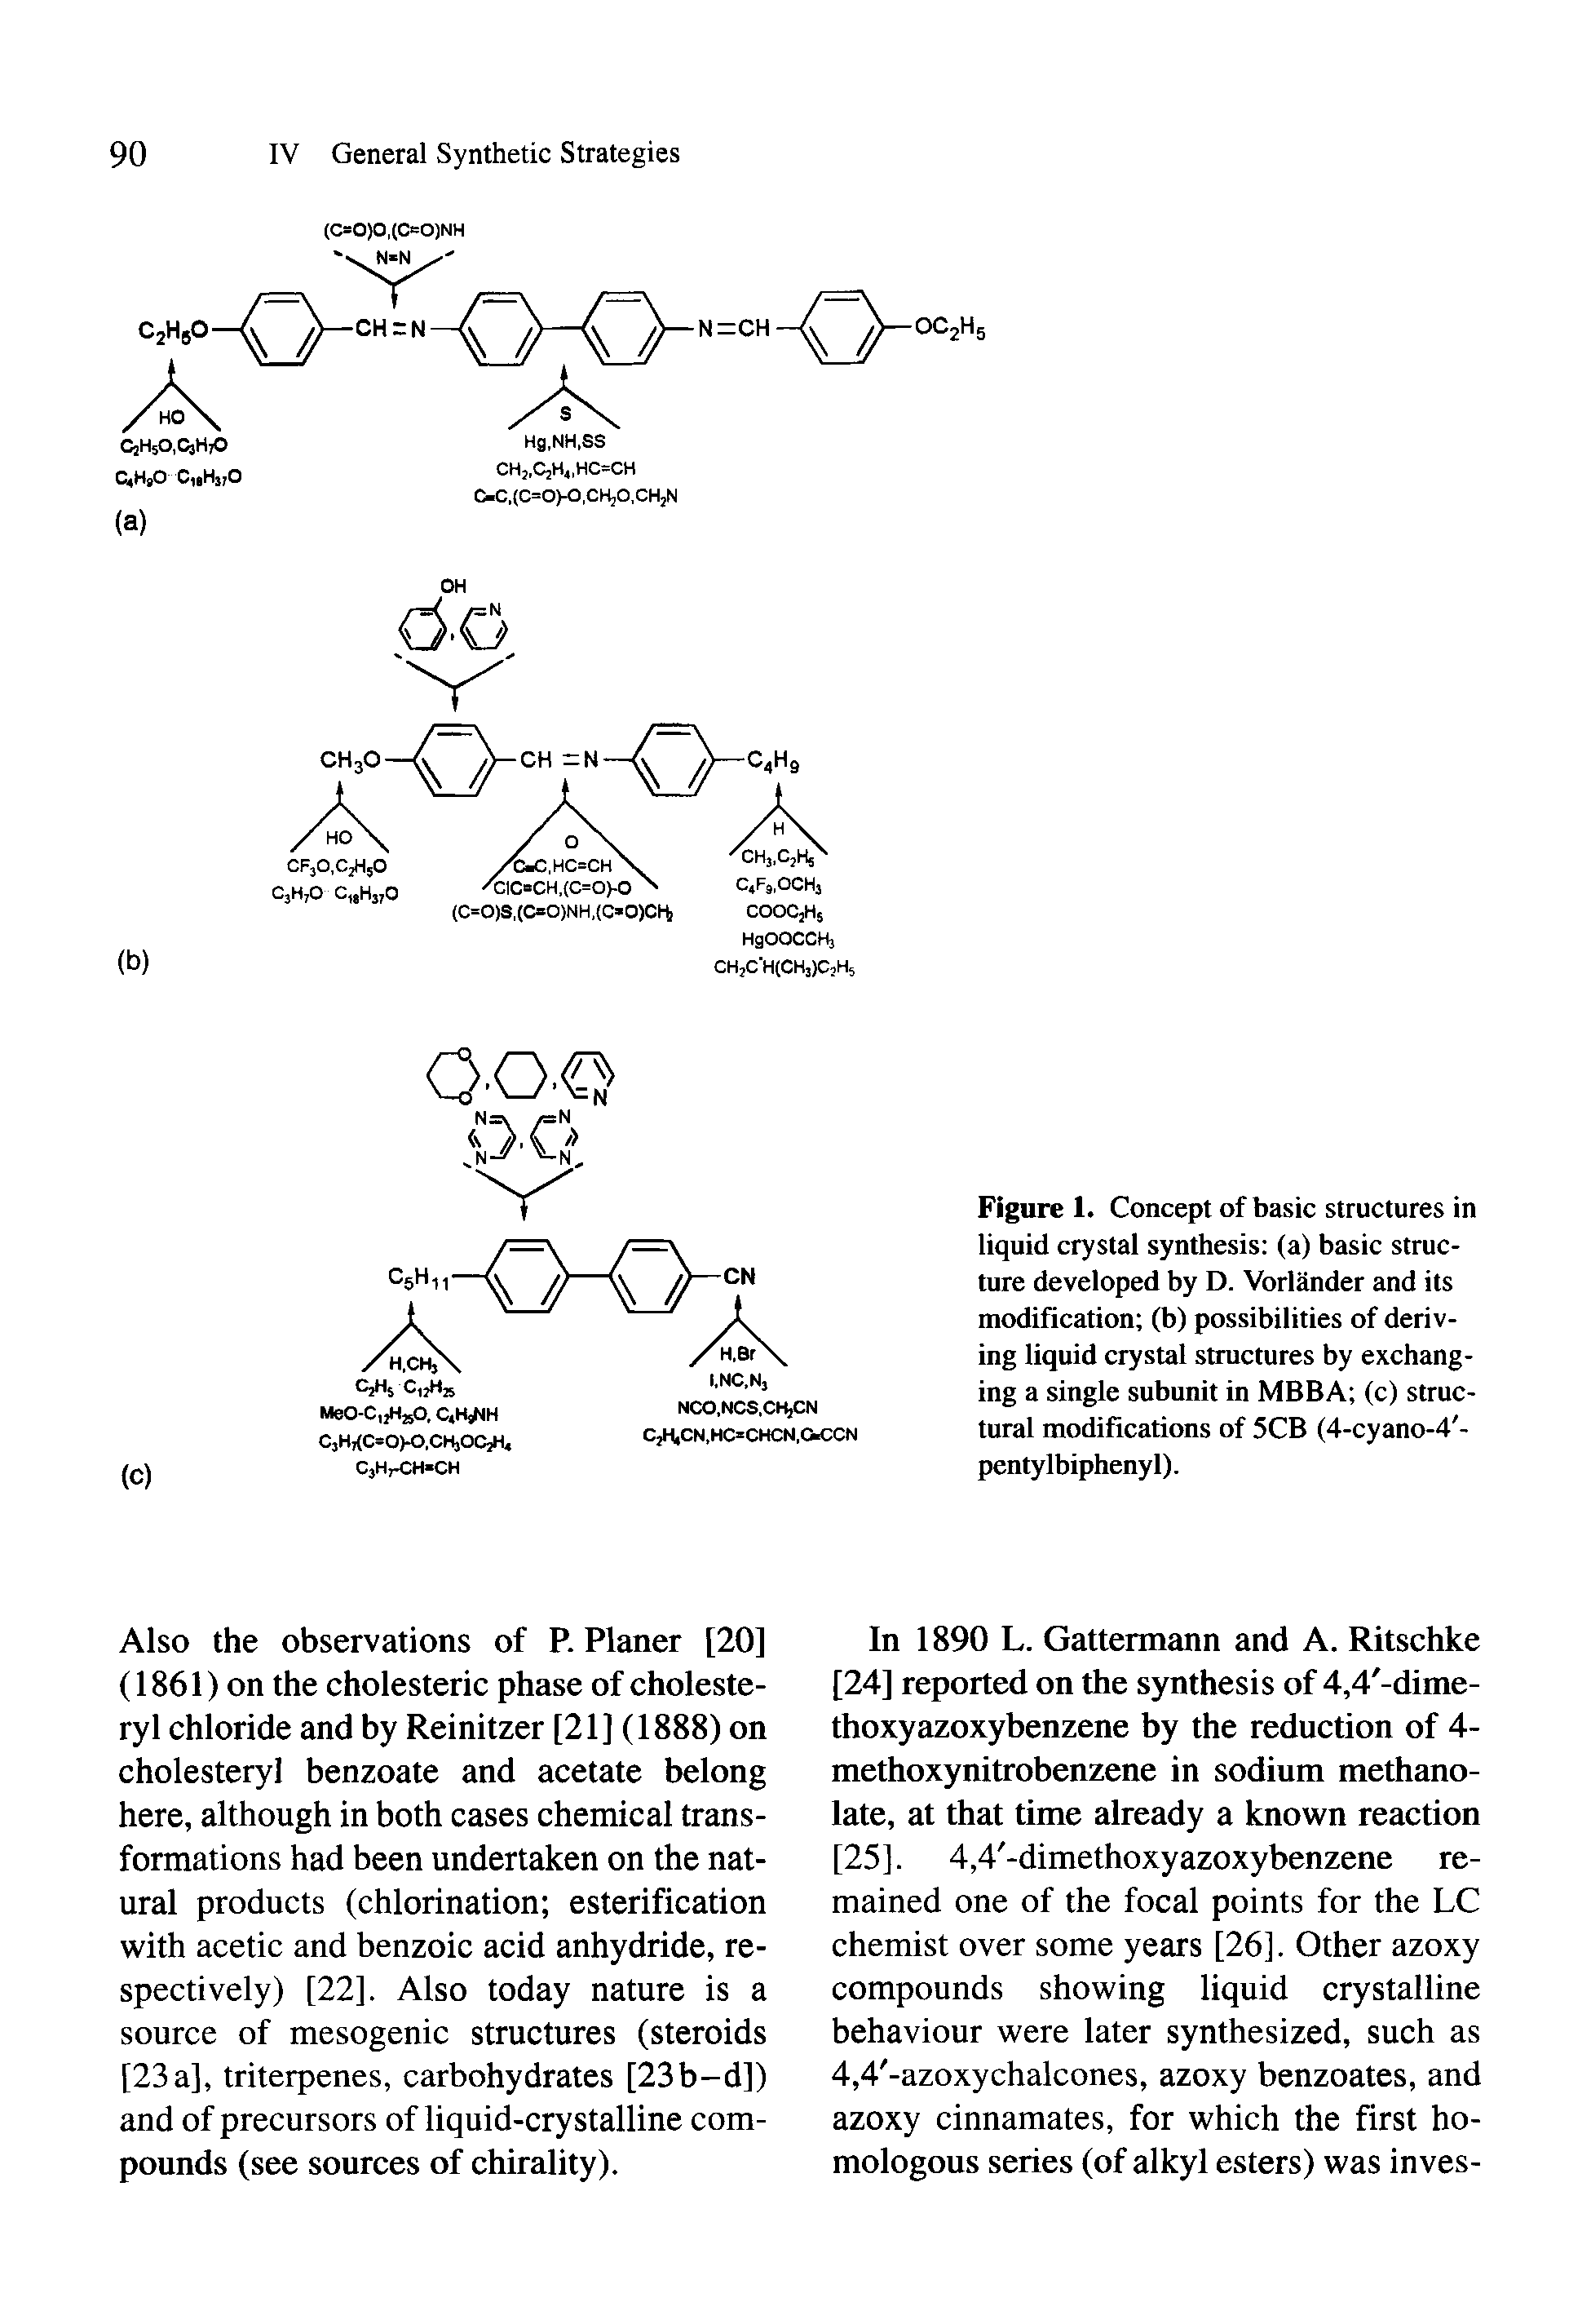 Figure 1. Concept of basic structures in liquid crystal synthesis (a) basic structure developed by D. Vorlander and its modification (b) possibilities of deriving liquid crystal structures by exchanging a single subunit in MBBA (c) structural modifications of 5CB (4-cyano-4 -pentylbiphenyl).